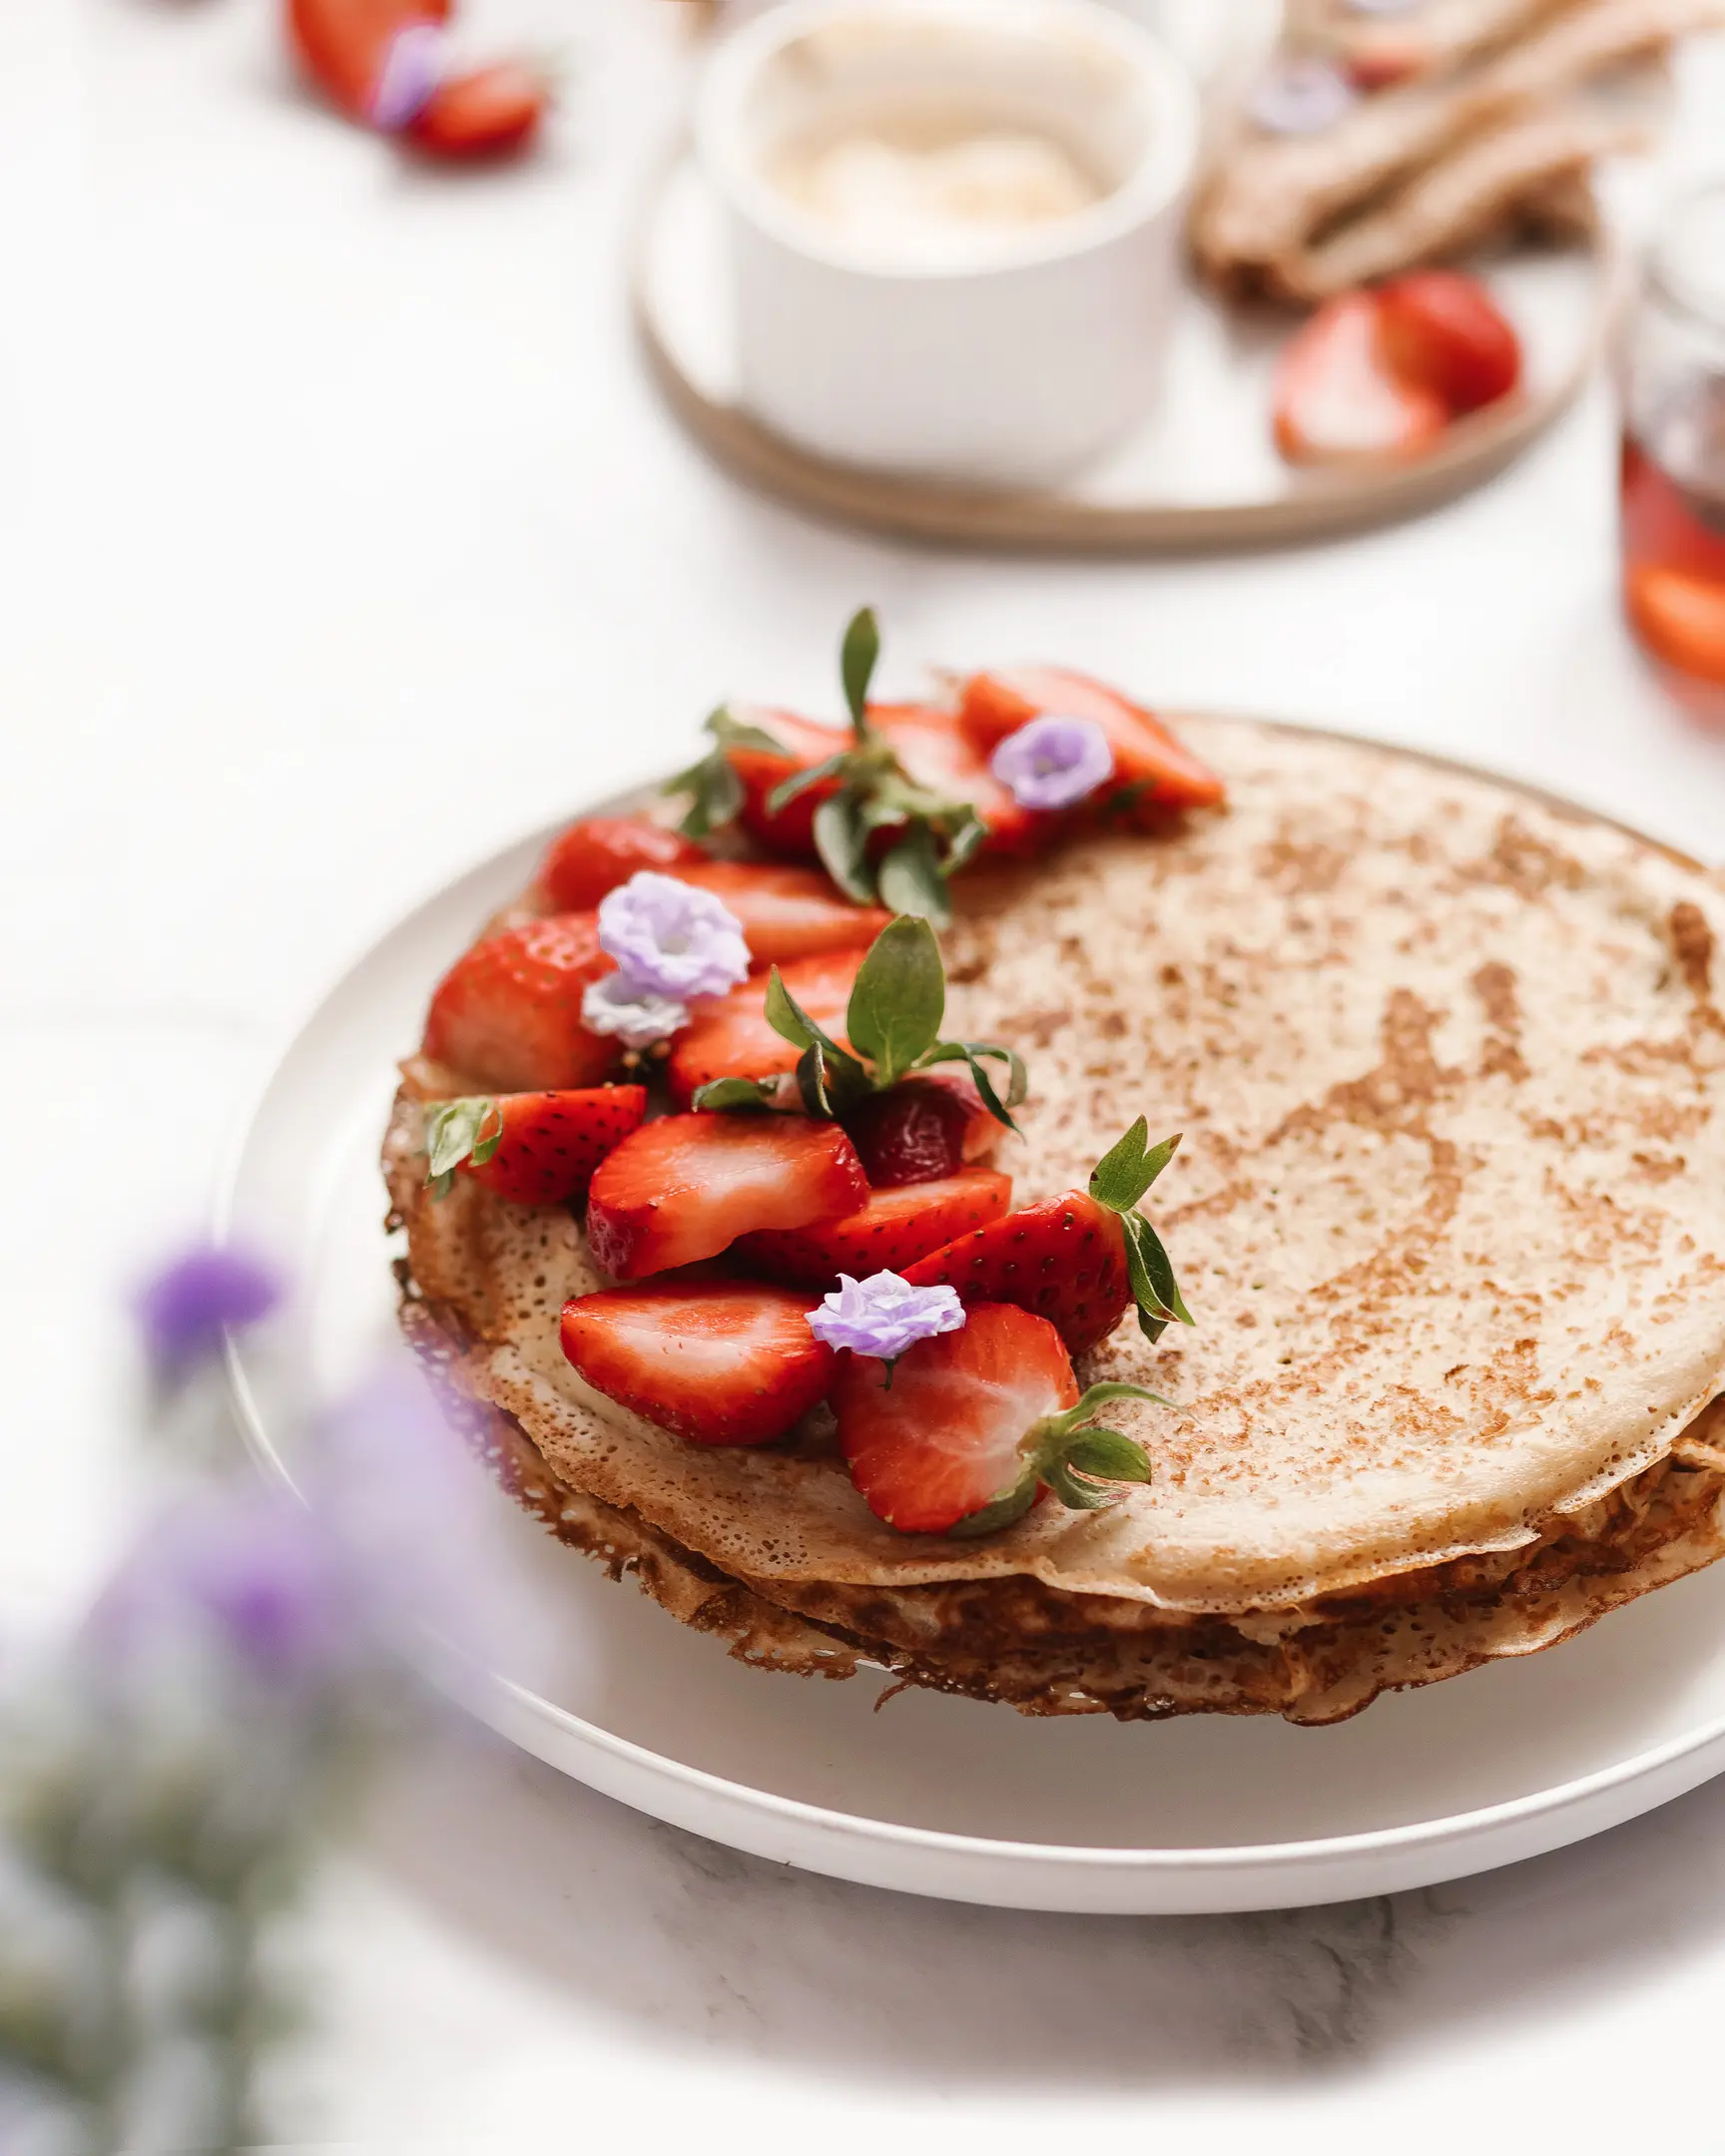 On a light background there is a plate with pancakes. On a light background, there is a plate with pancakes. in the foreground, the viewer's eye sees purple flowers. A plate of oil is visible at the back. There are strawberries on pancakes.
